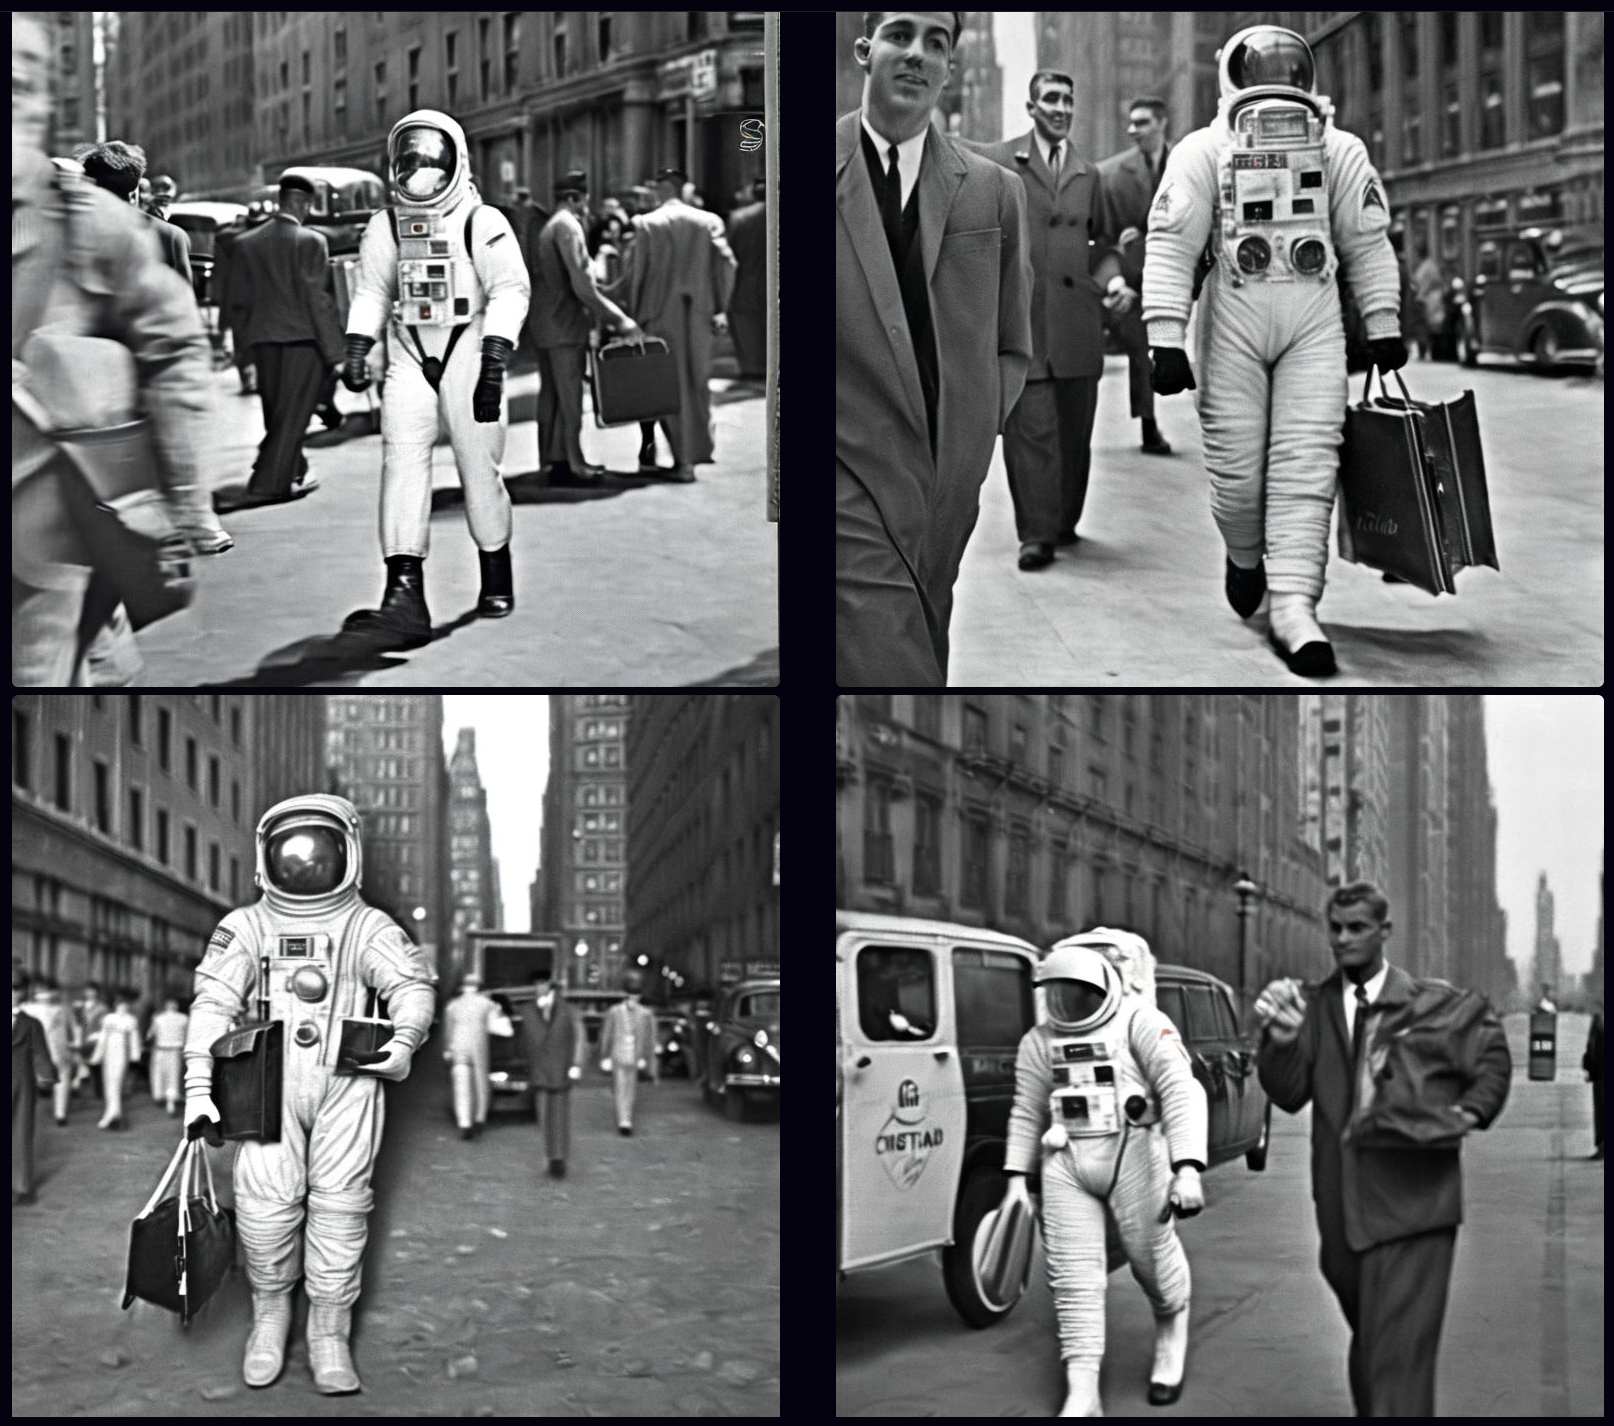 4 images of an astronaut in retro New York, with other people milling around